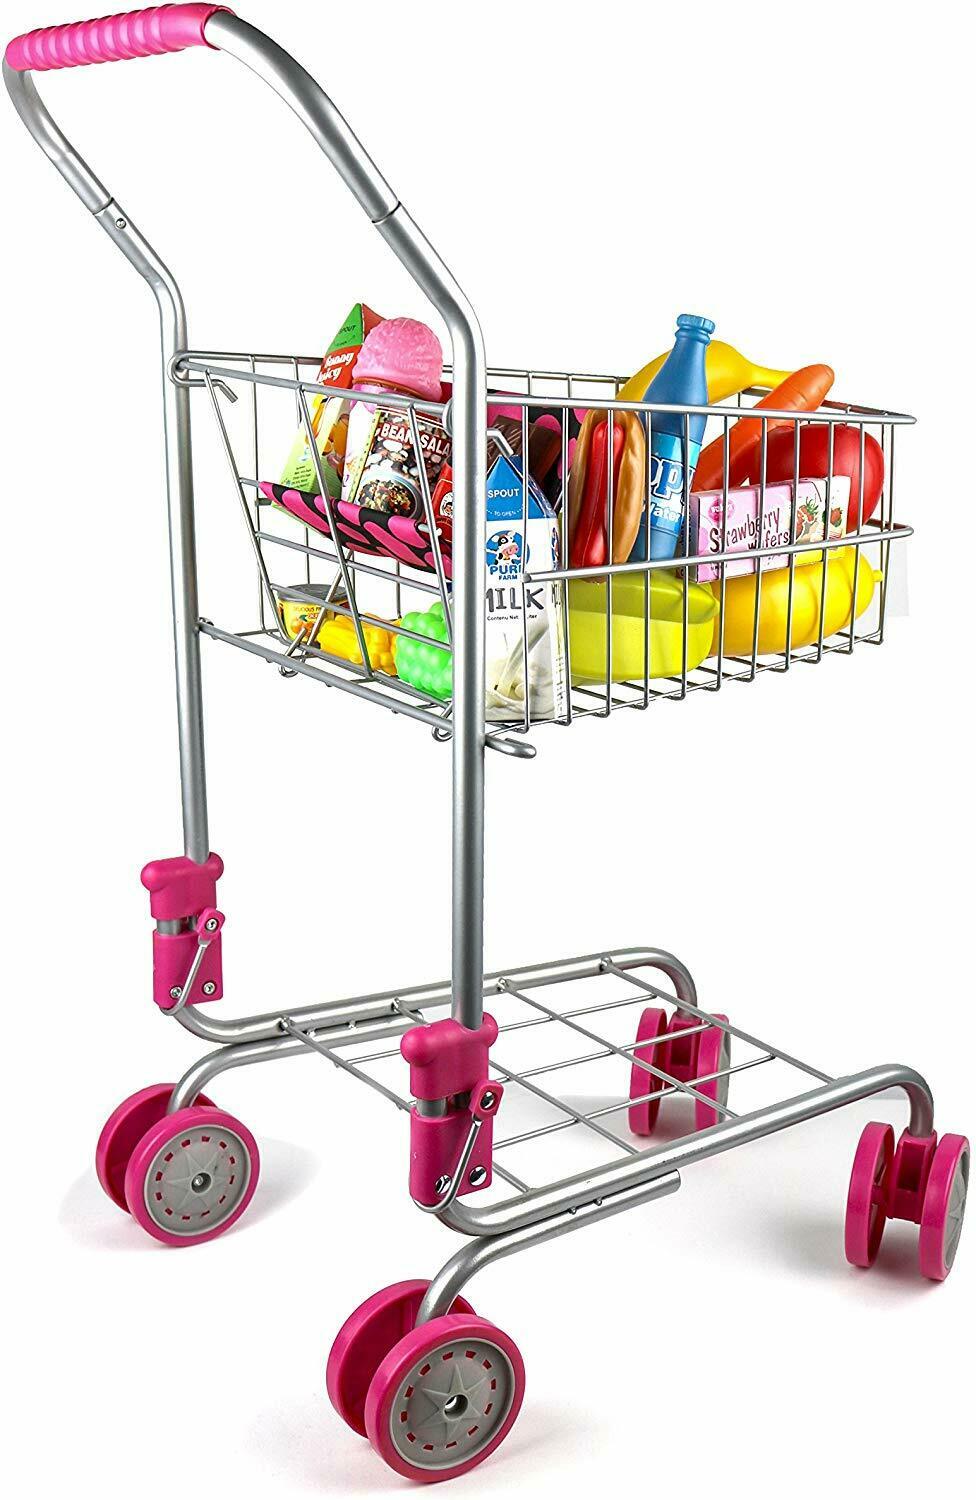 Precious Toys Kids&toddler Pretend Play Shopping Cart With Groceries